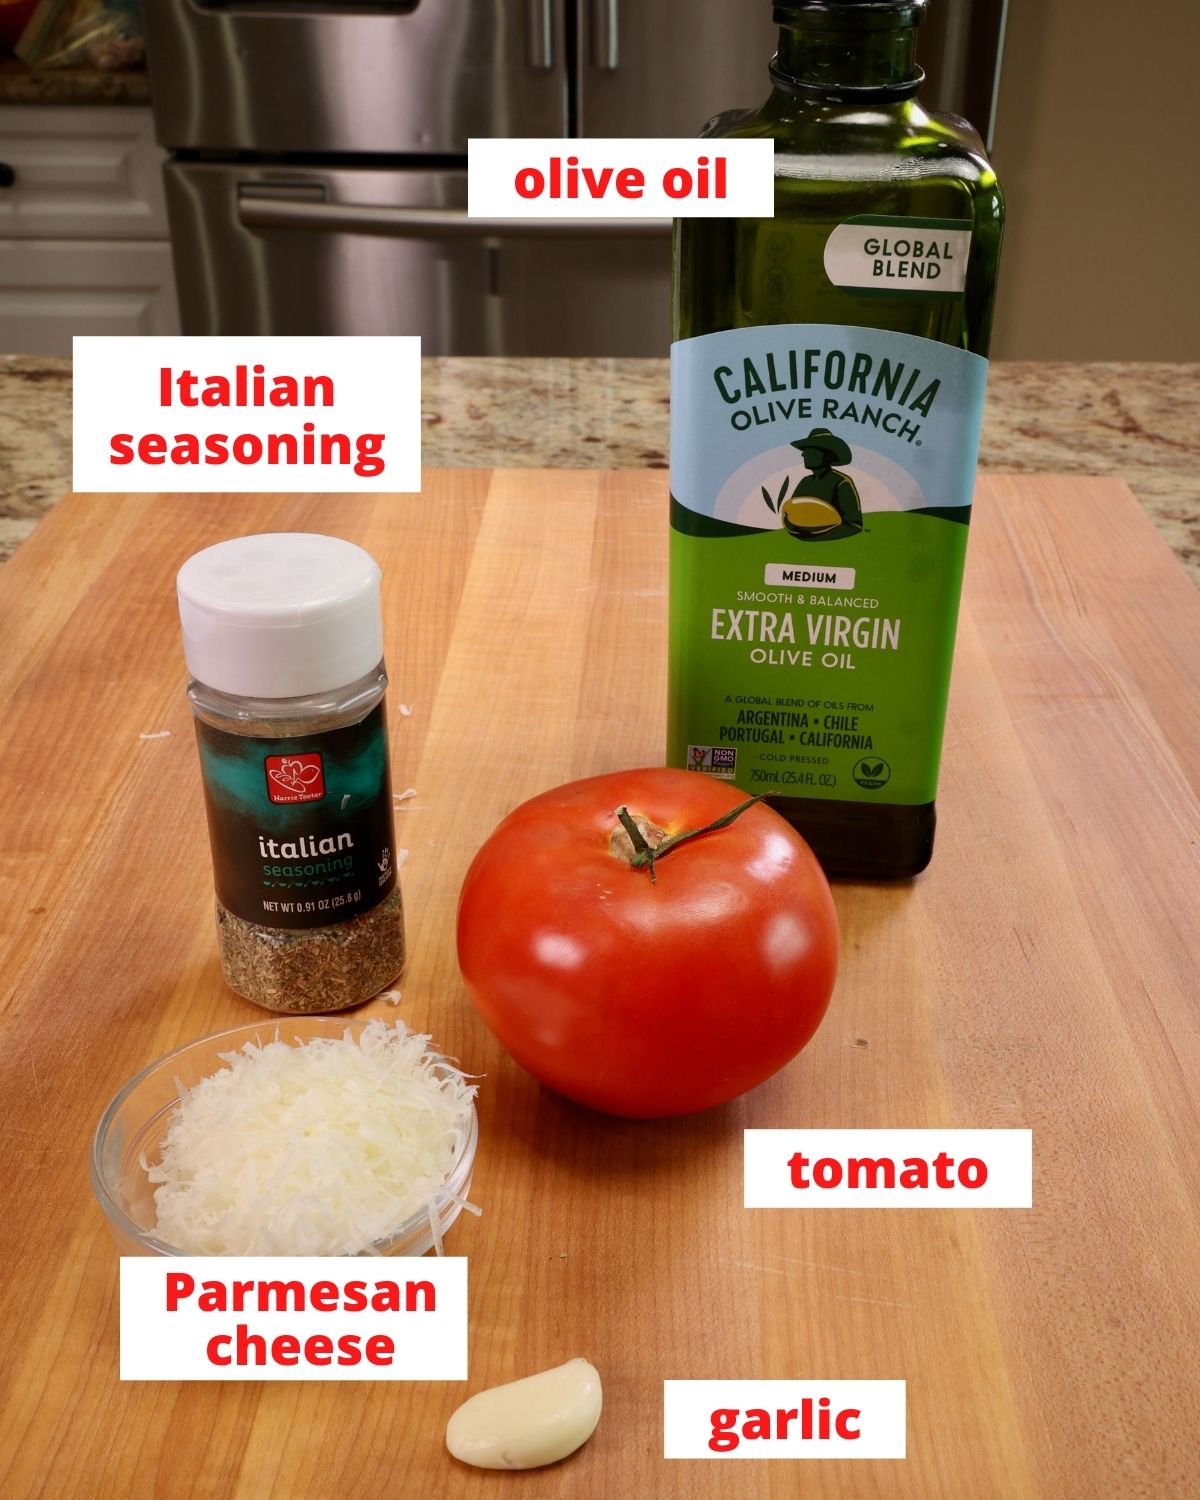 a tomato, olive oil, parmesan cheese, garlic, and italian seasoning on a wooden cutting board in a kitchen.